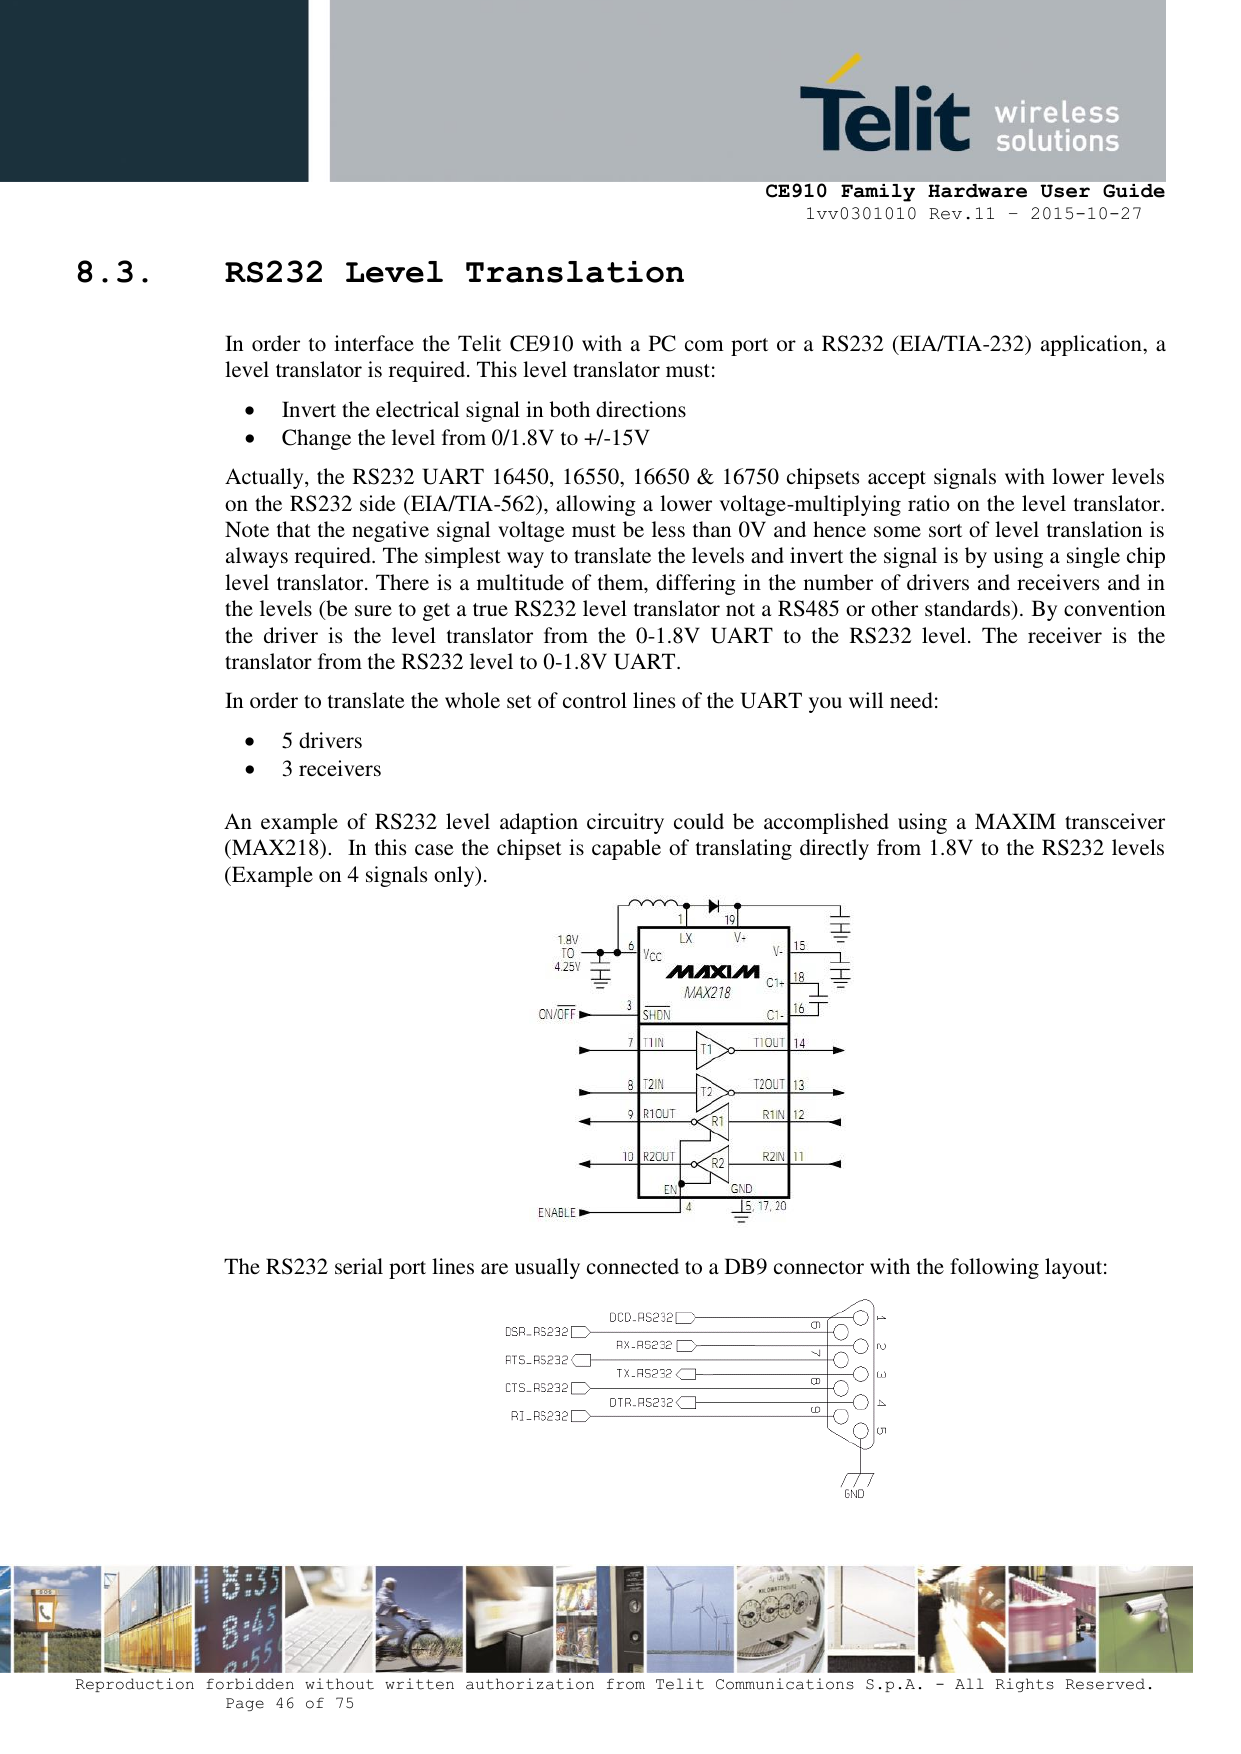     CE910 Family Hardware User Guide 1vv0301010 Rev.11 – 2015-10-27 Reproduction forbidden without written authorization from Telit Communications S.p.A. - All Rights Reserved.    Page 46 of 75                                                     8.3. RS232 Level Translation In order to interface the Telit CE910 with a PC com port or a RS232 (EIA/TIA-232) application, a level translator is required. This level translator must:  Invert the electrical signal in both directions  Change the level from 0/1.8V to +/-15V Actually, the RS232 UART 16450, 16550, 16650 &amp; 16750 chipsets accept signals with lower levels on the RS232 side (EIA/TIA-562), allowing a lower voltage-multiplying ratio on the level translator. Note that the negative signal voltage must be less than 0V and hence some sort of level translation is always required. The simplest way to translate the levels and invert the signal is by using a single chip level translator. There is a multitude of them, differing in the number of drivers and receivers and in the levels (be sure to get a true RS232 level translator not a RS485 or other standards). By convention the  driver  is  the  level  translator  from  the  0-1.8V  UART  to  the  RS232  level.  The  receiver  is  the translator from the RS232 level to 0-1.8V UART. In order to translate the whole set of control lines of the UART you will need:  5 drivers  3 receivers  An example of RS232 level adaption circuitry could be accomplished using a MAXIM transceiver (MAX218).  In this case the chipset is capable of translating directly from 1.8V to the RS232 levels (Example on 4 signals only).   The RS232 serial port lines are usually connected to a DB9 connector with the following layout:    